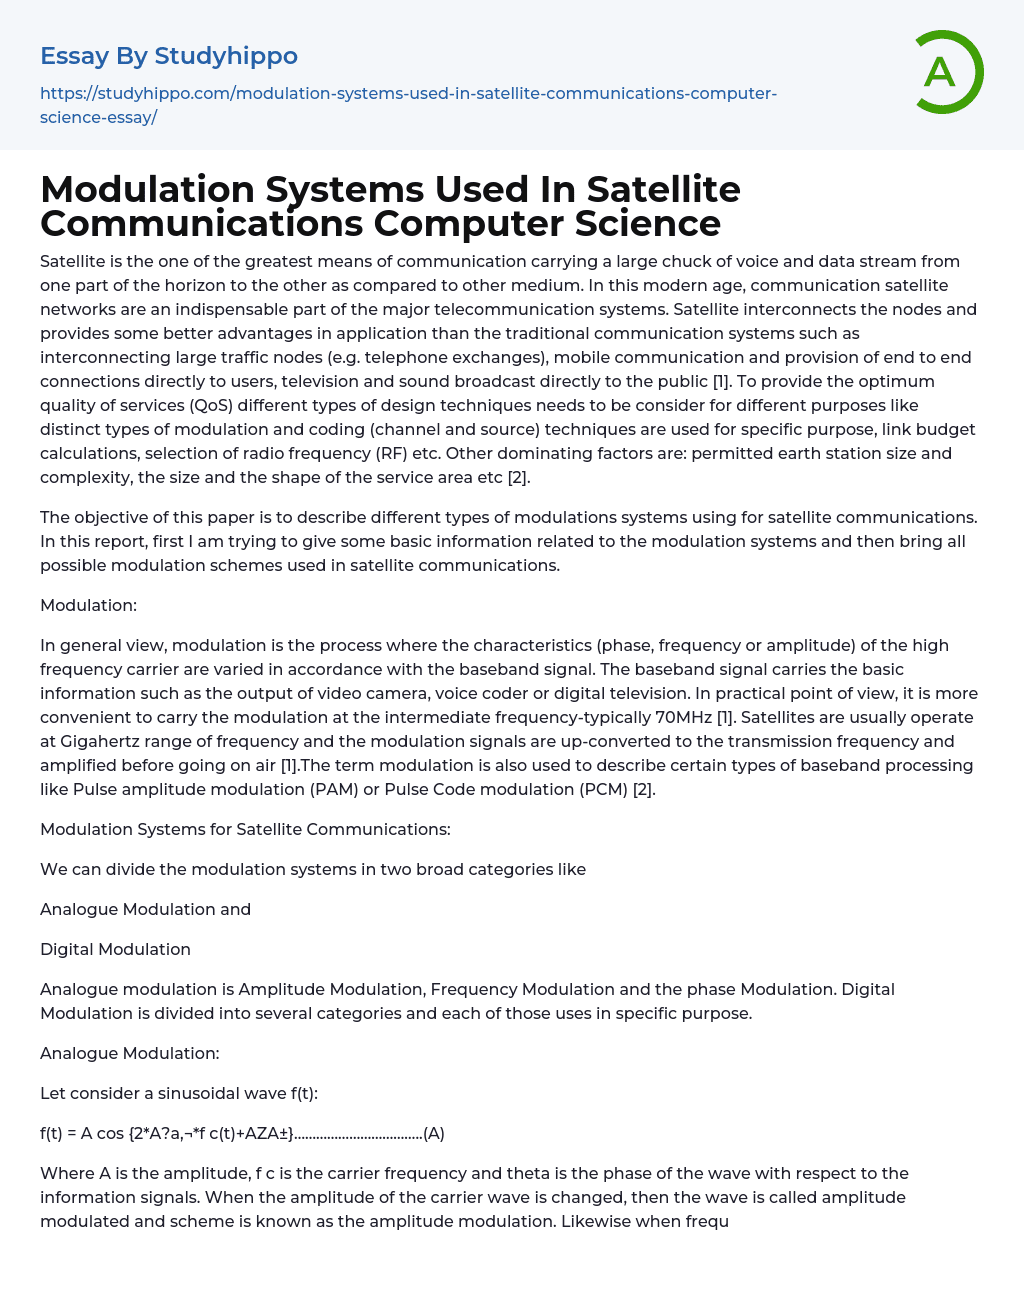 Modulation Systems Used In Satellite Communications Computer Science Essay Example